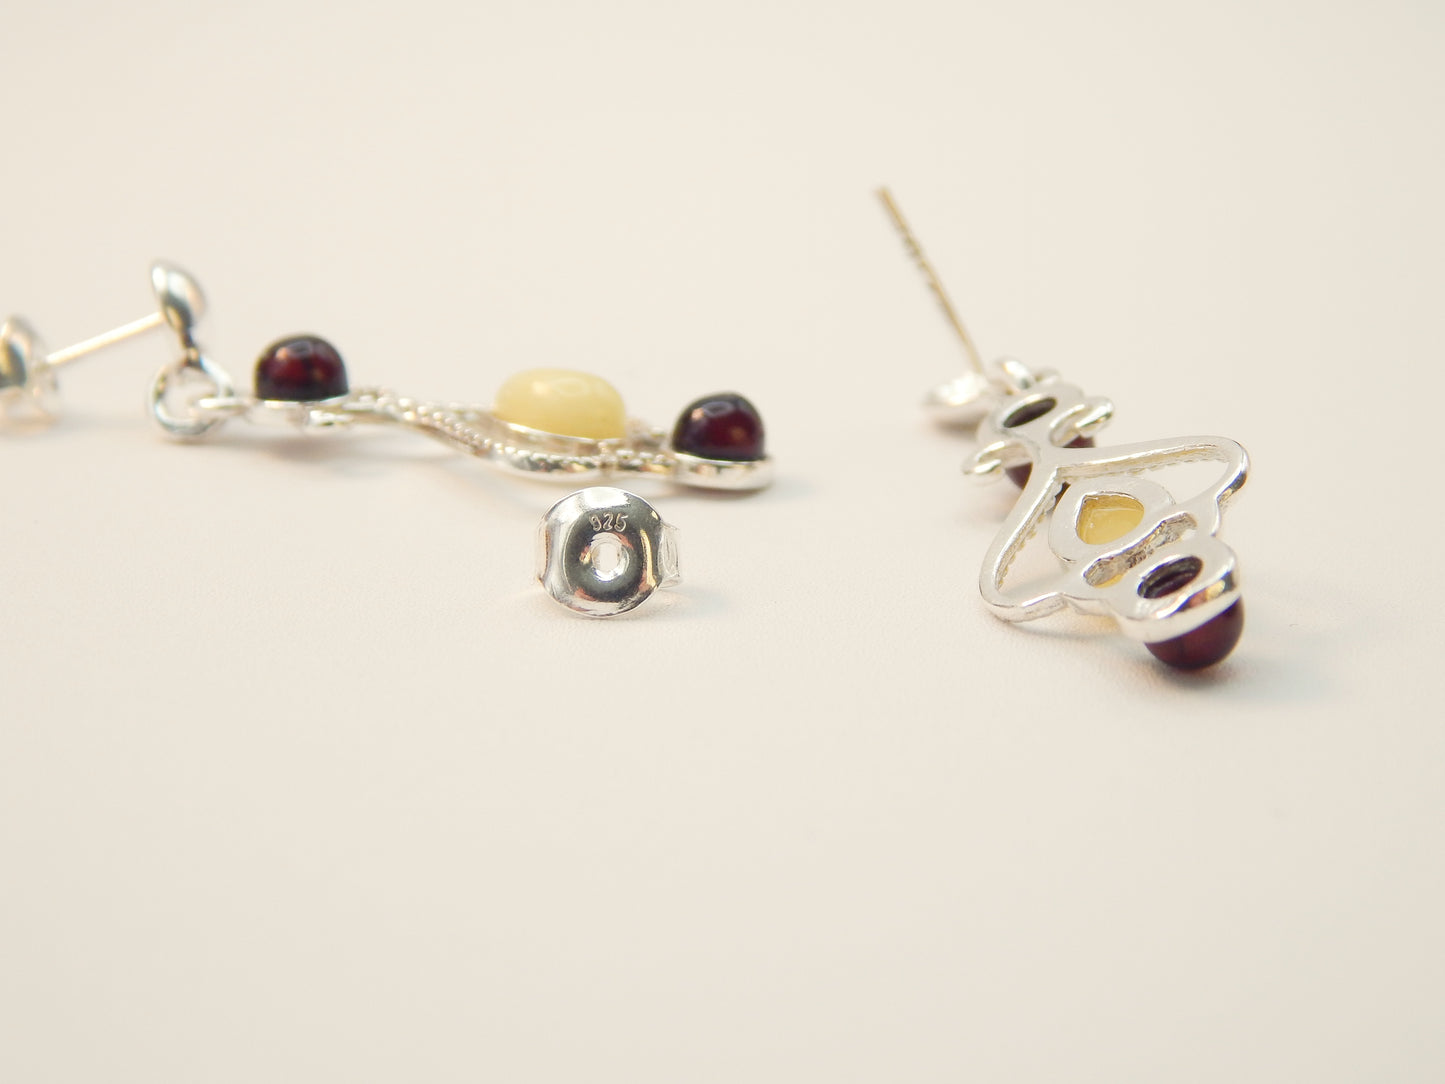 Natural Baltic Butterscotch and Cherry Amber Queen of Hearts Earrings in 925 Sterling Silver